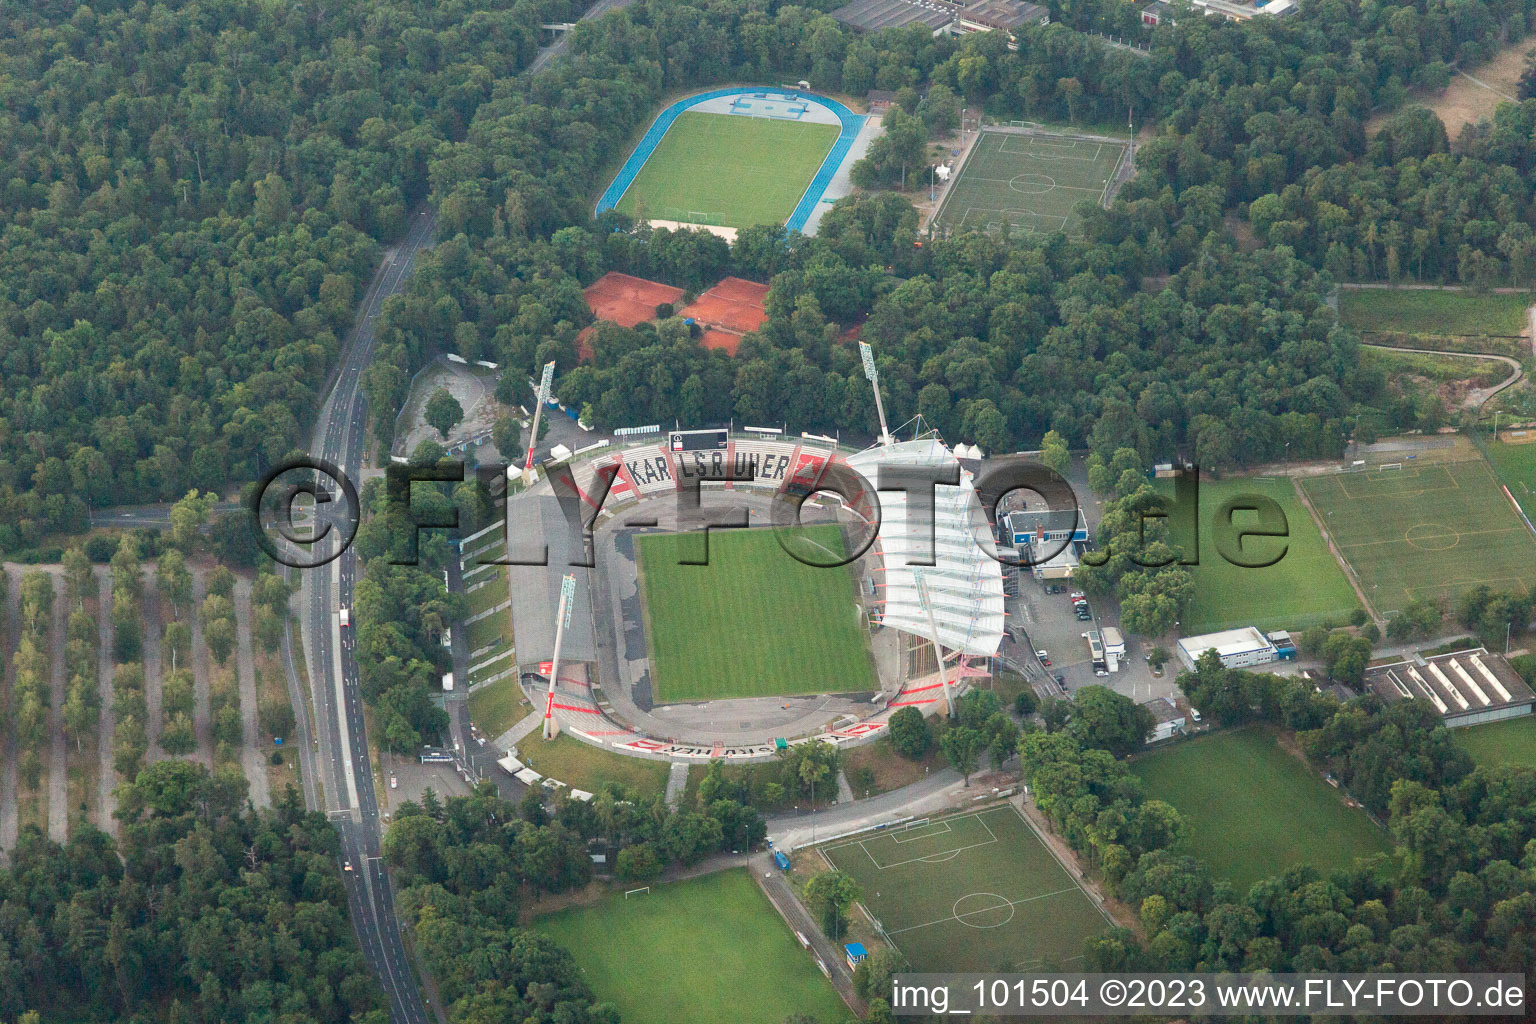 Oblique view of Stadion in the district Innenstadt-Ost in Karlsruhe in the state Baden-Wuerttemberg, Germany